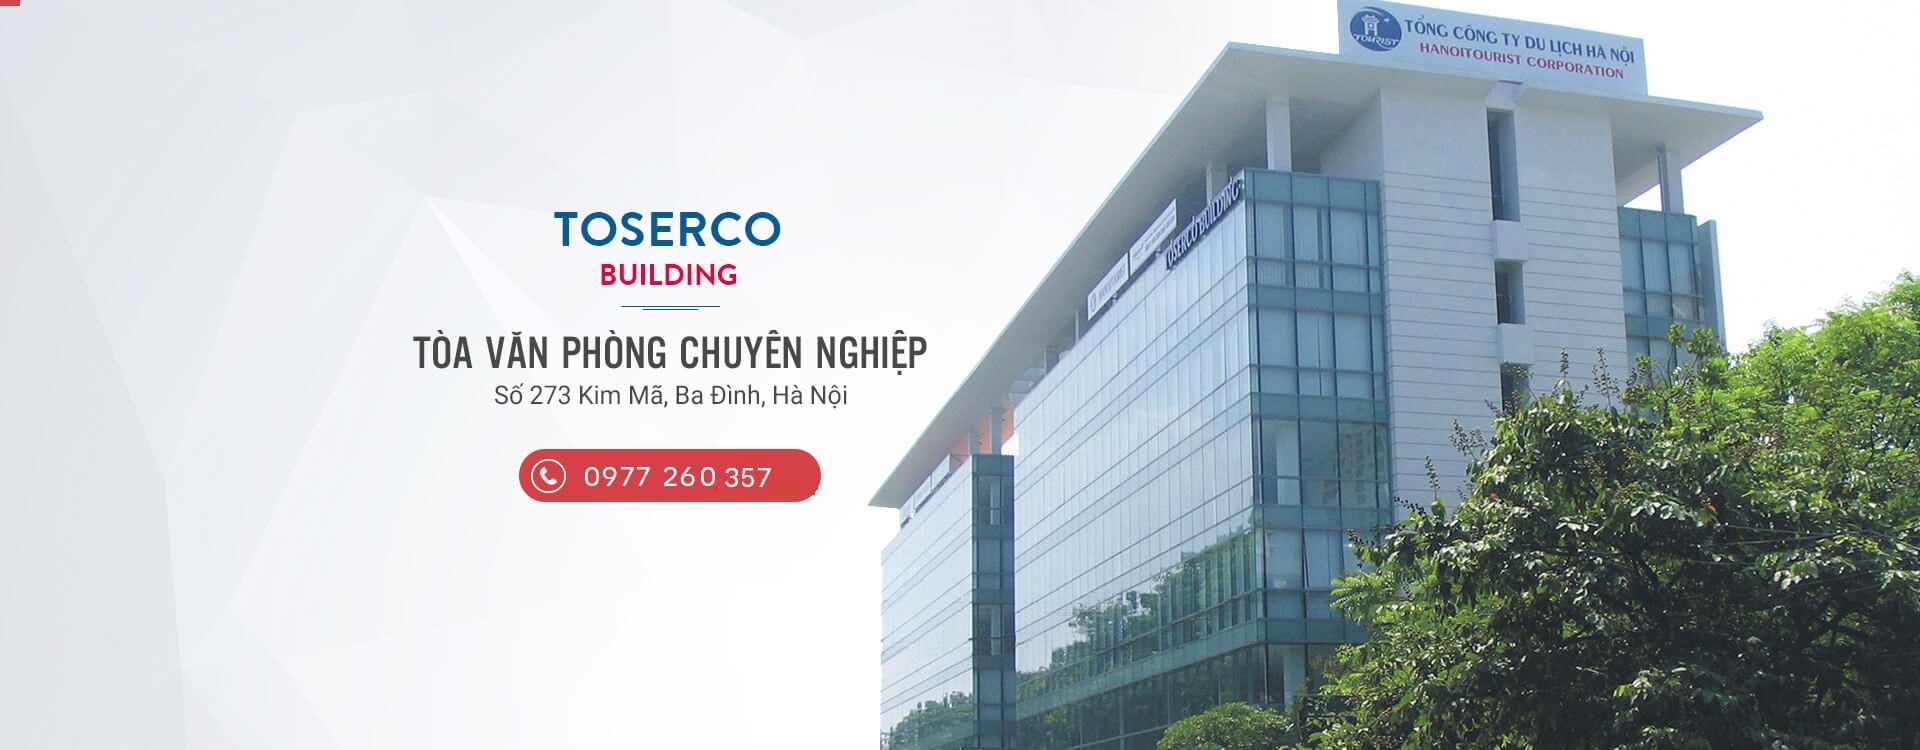 Toserco Building - Banner